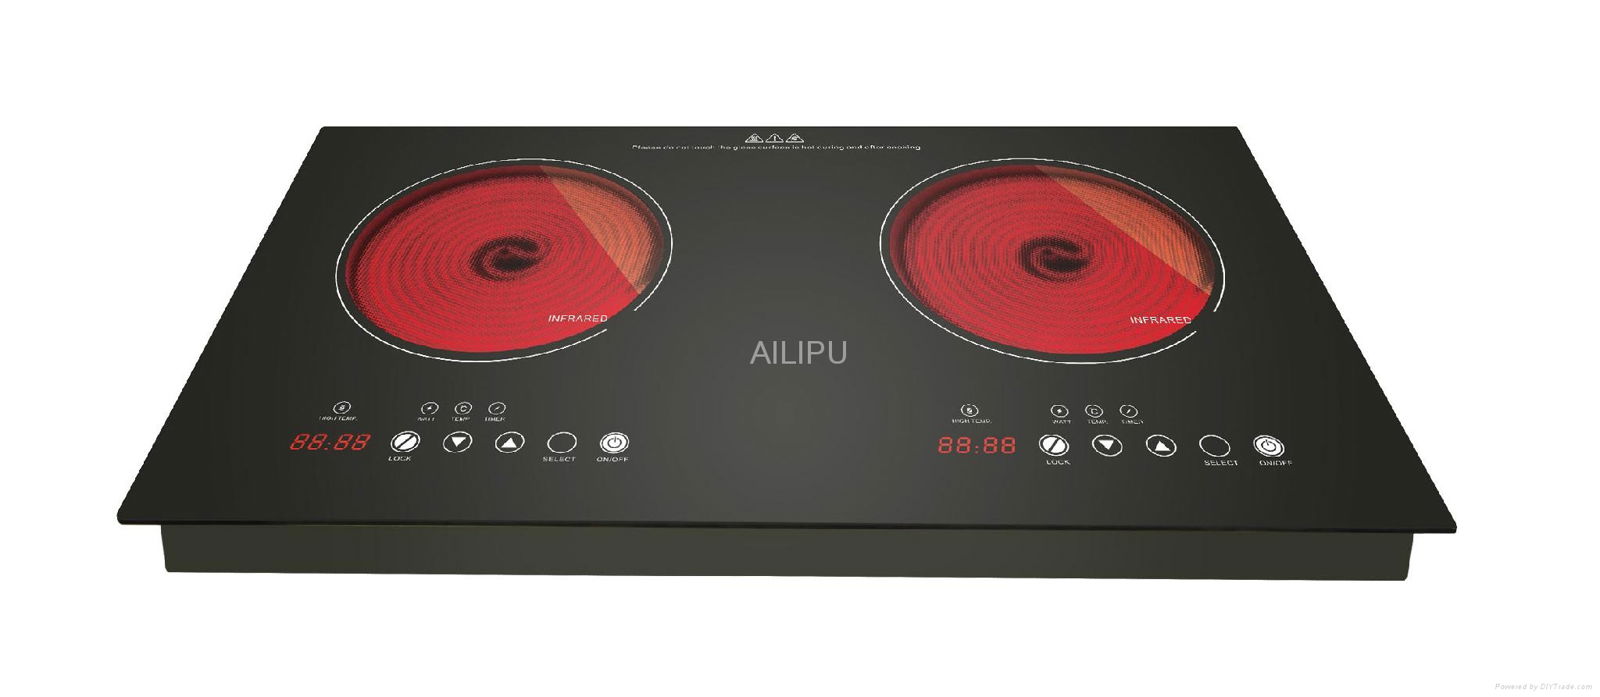 2 burners infrared cooker 3600W high power ceramic cooker